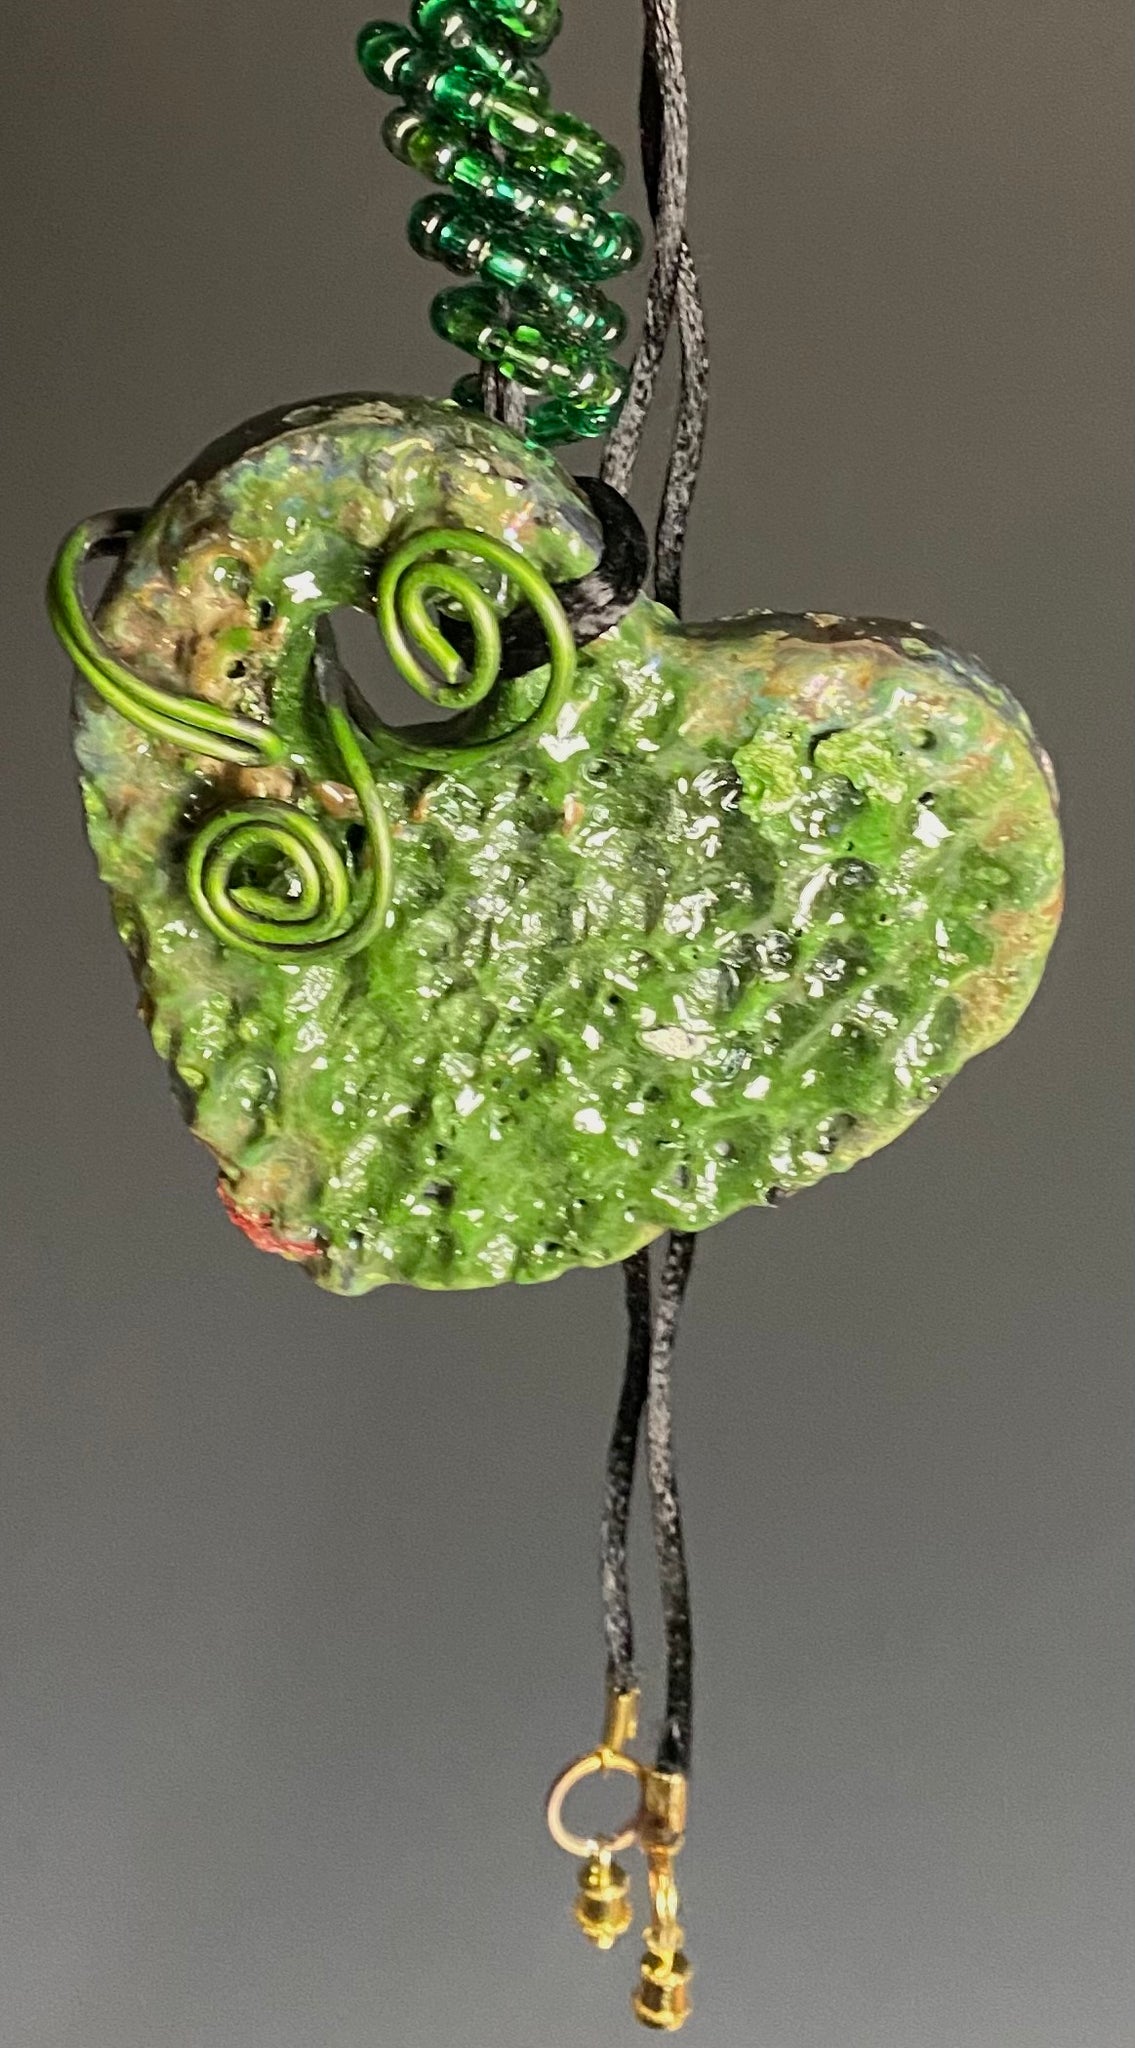 Have A Heart! Each heart pendant is handmade with love! It is 3"x 3"and weighs approx. 3ozs. This pendant has a green and  gold metallic raku glazes that renders a unique translucent  patina. The heart has a textured pattern . Both sides are  are different and equally beautiful! It holds a spiral of green mini beads on a spiral copper wire. This pendant has a nice 12" black rattail cord!